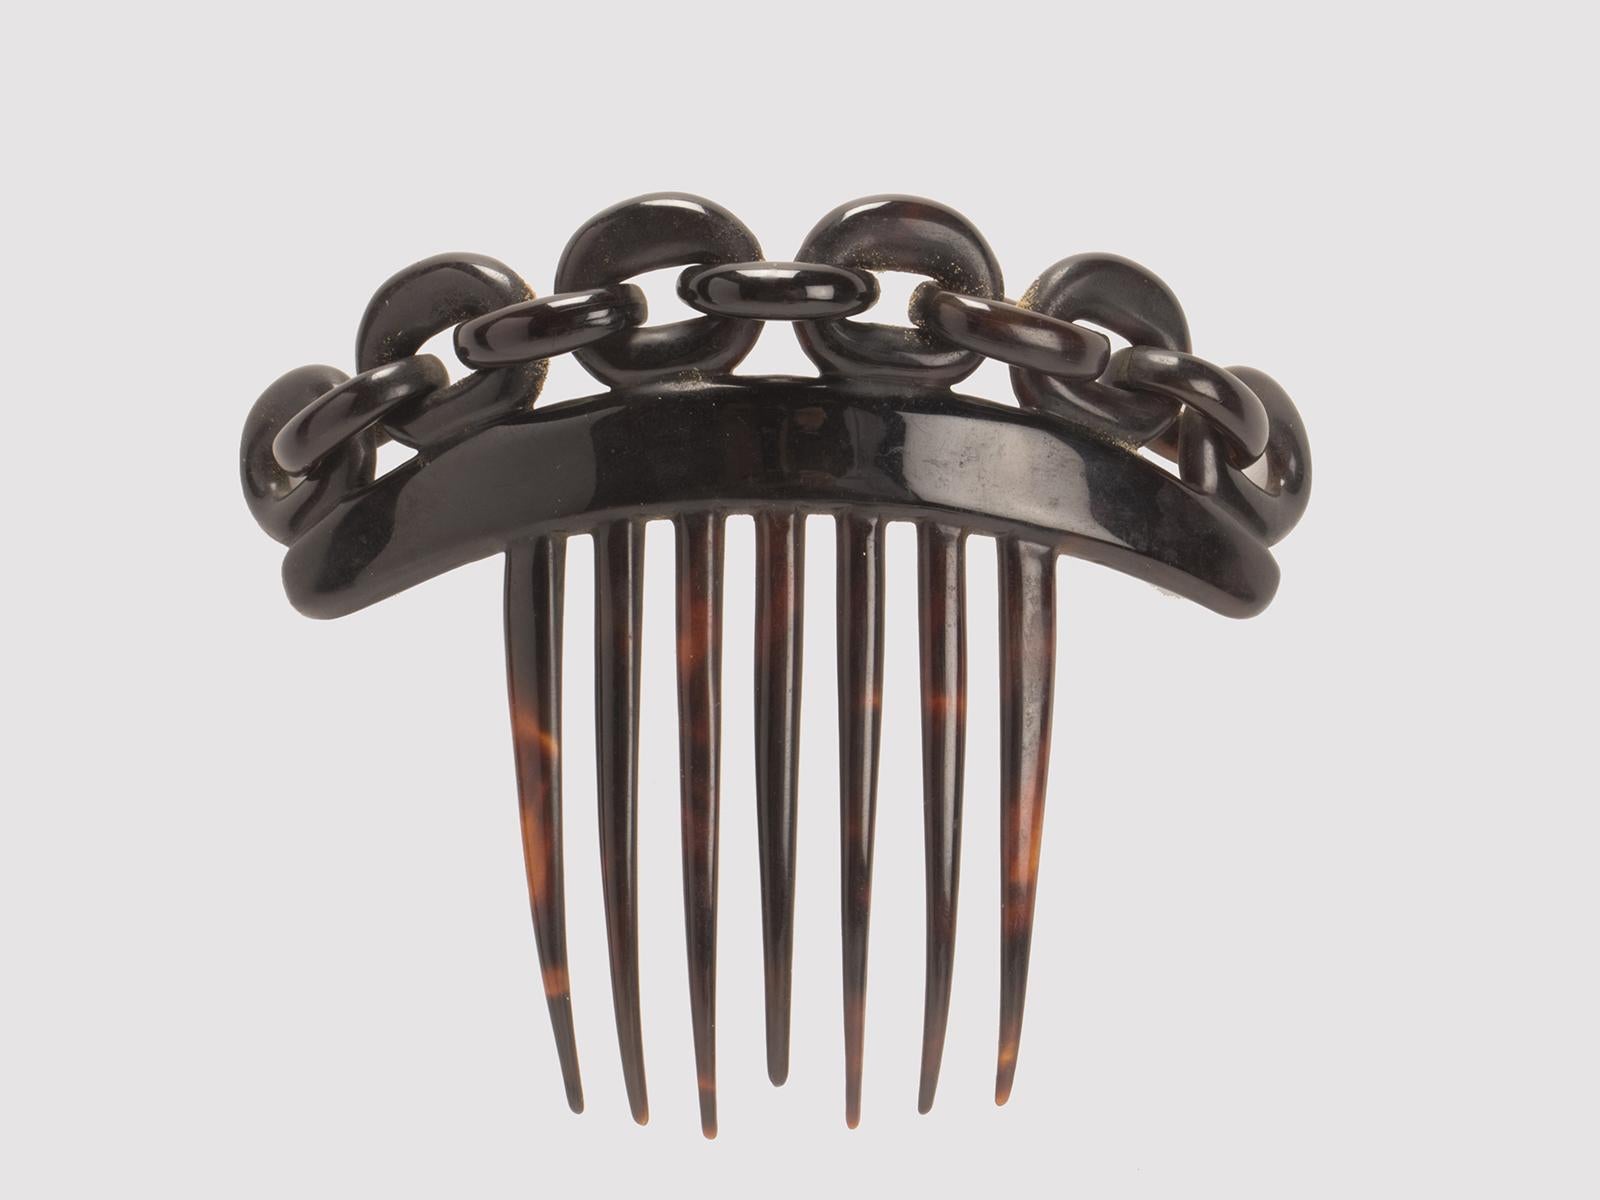 Tiara hair comb, in tortoiseshell, topped by an element, also in tortoiseshell, decorated with a sculpted chain motif sloping down from the center towards the edges. France circa 1900. (SHIP TO EU ONLY)